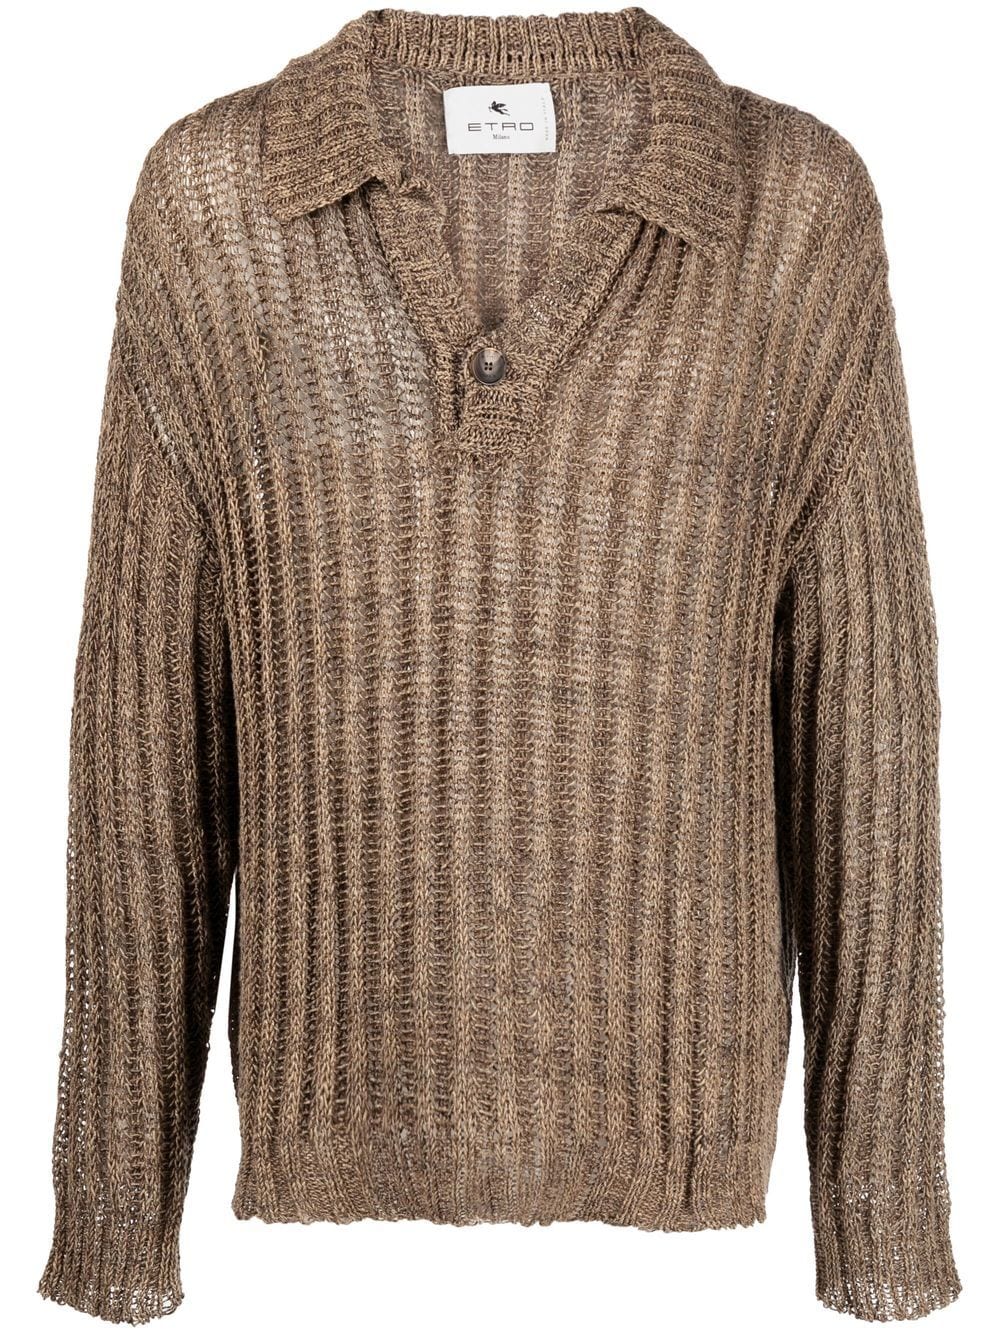 Etro Chunky Ribbed Knit Jumper In Brown